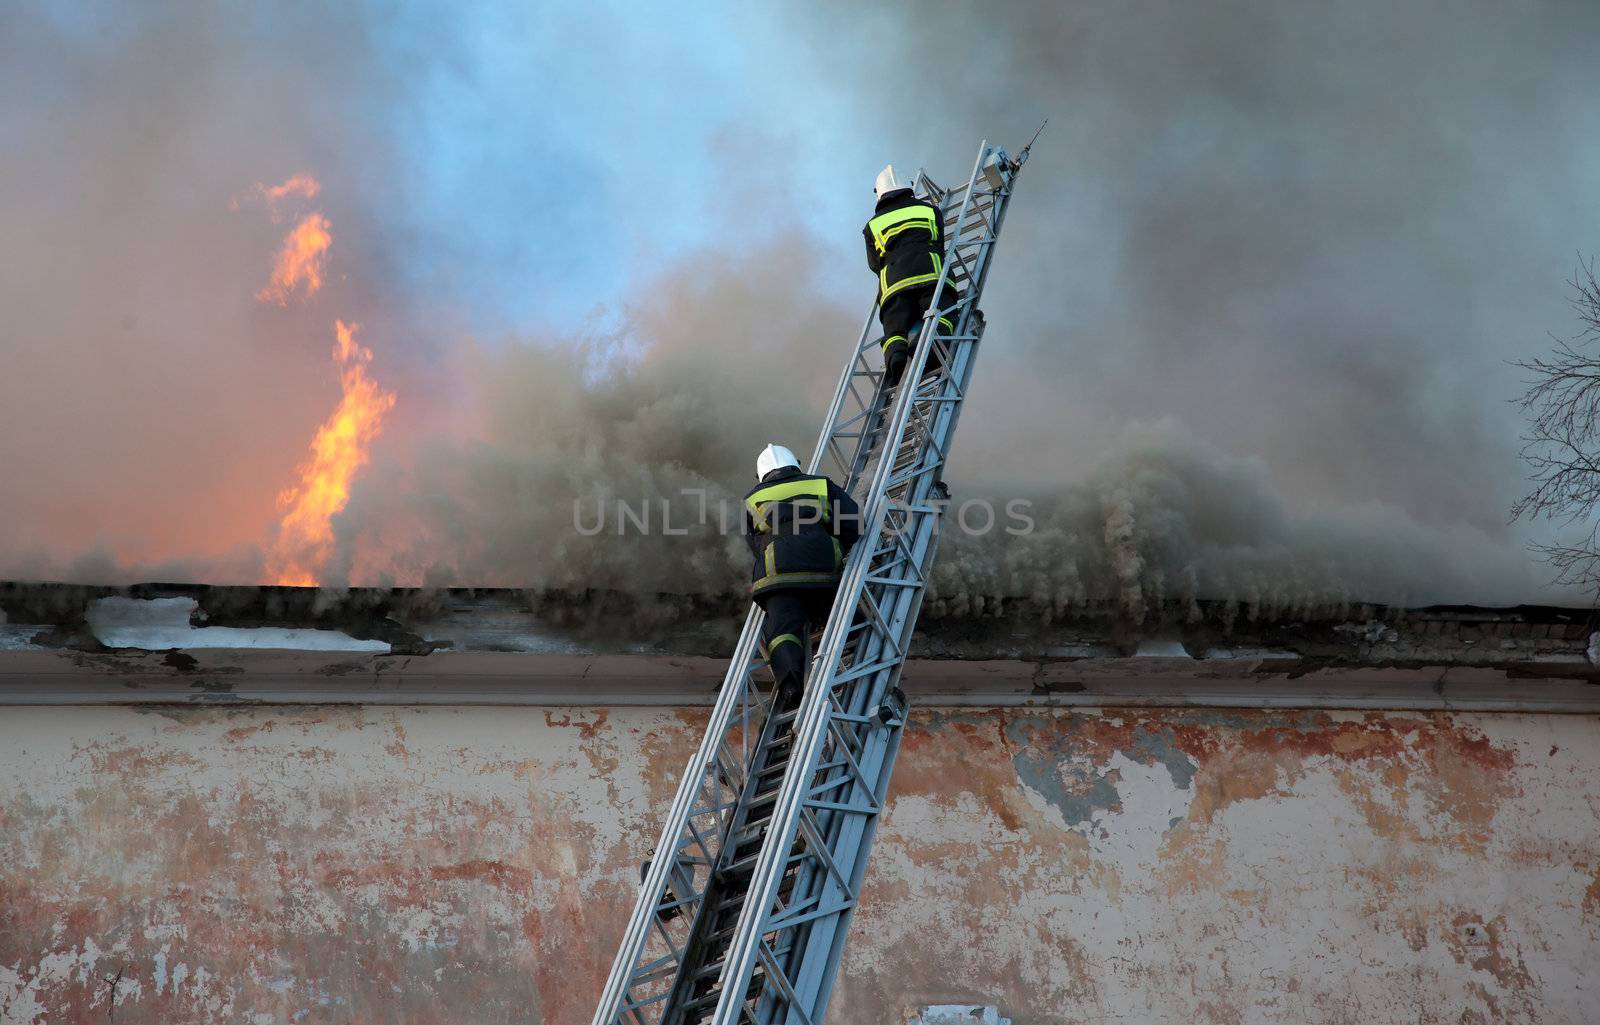 Firefighters extinguish fire from a high ladder against the background of a burning building roof